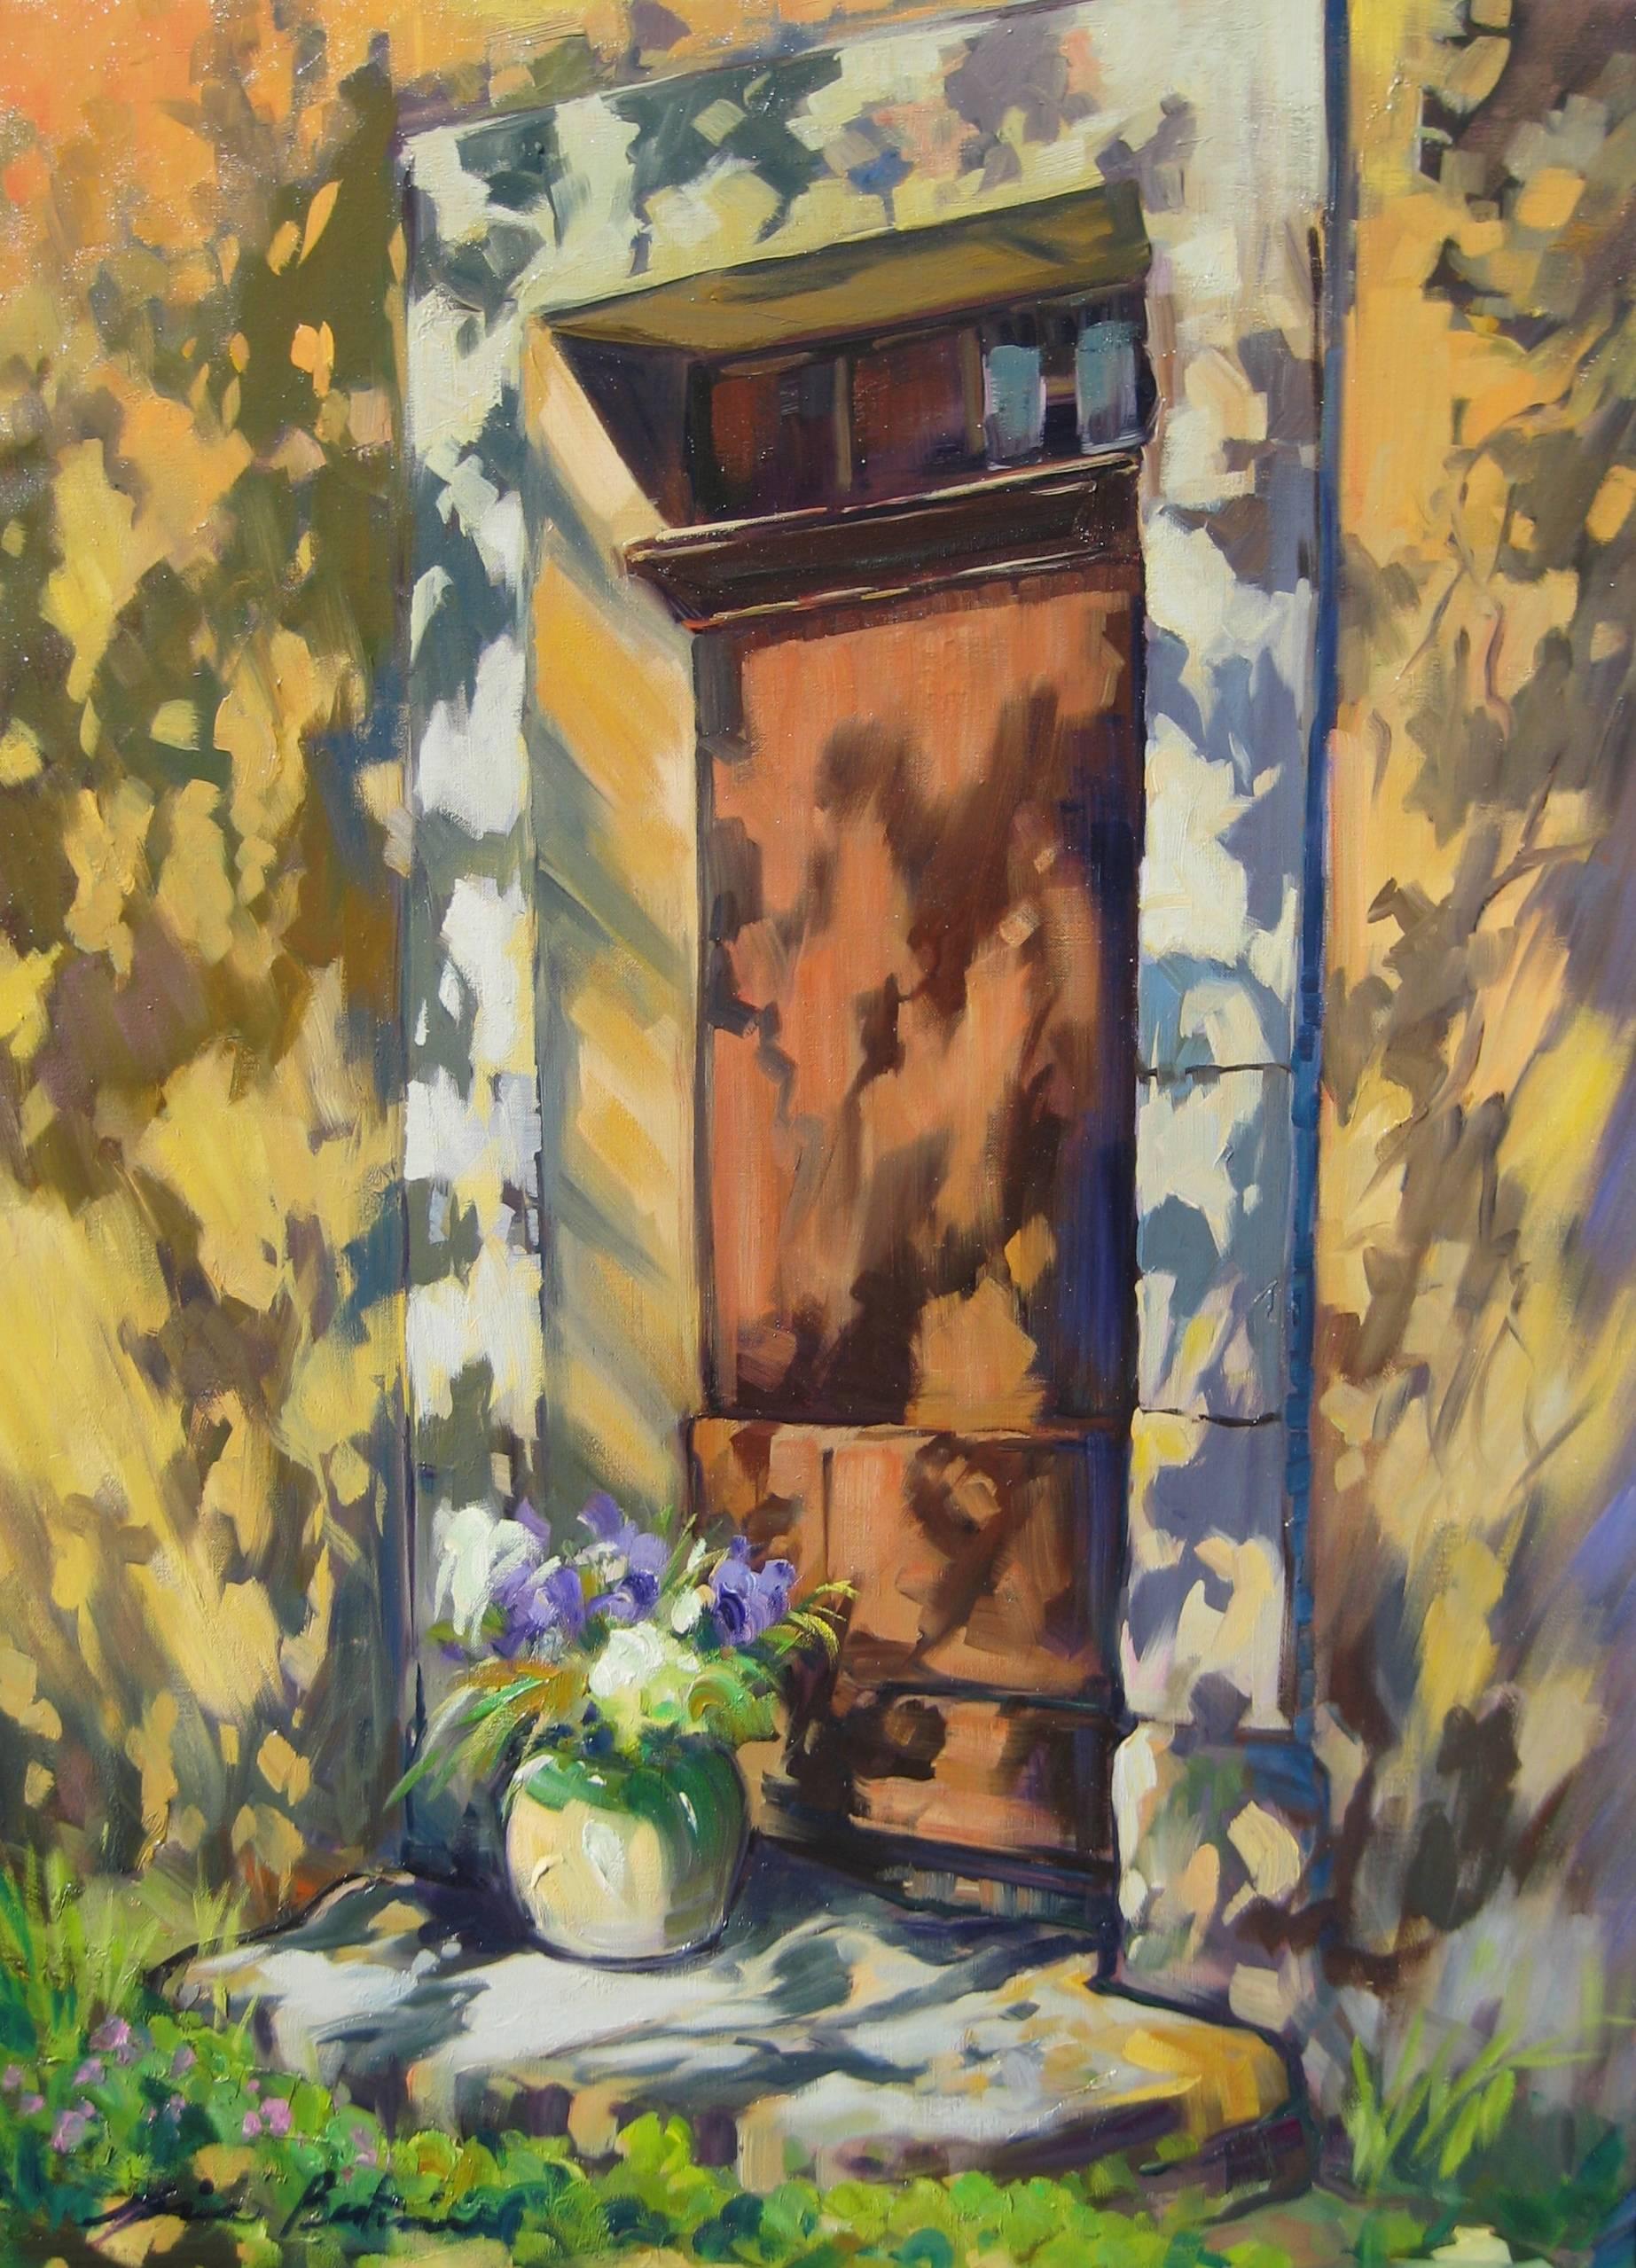 Maria Bertrán Landscape Painting - "Shadows On The Door" Contemporary Impressionist Oil Painting by Maria Bertran